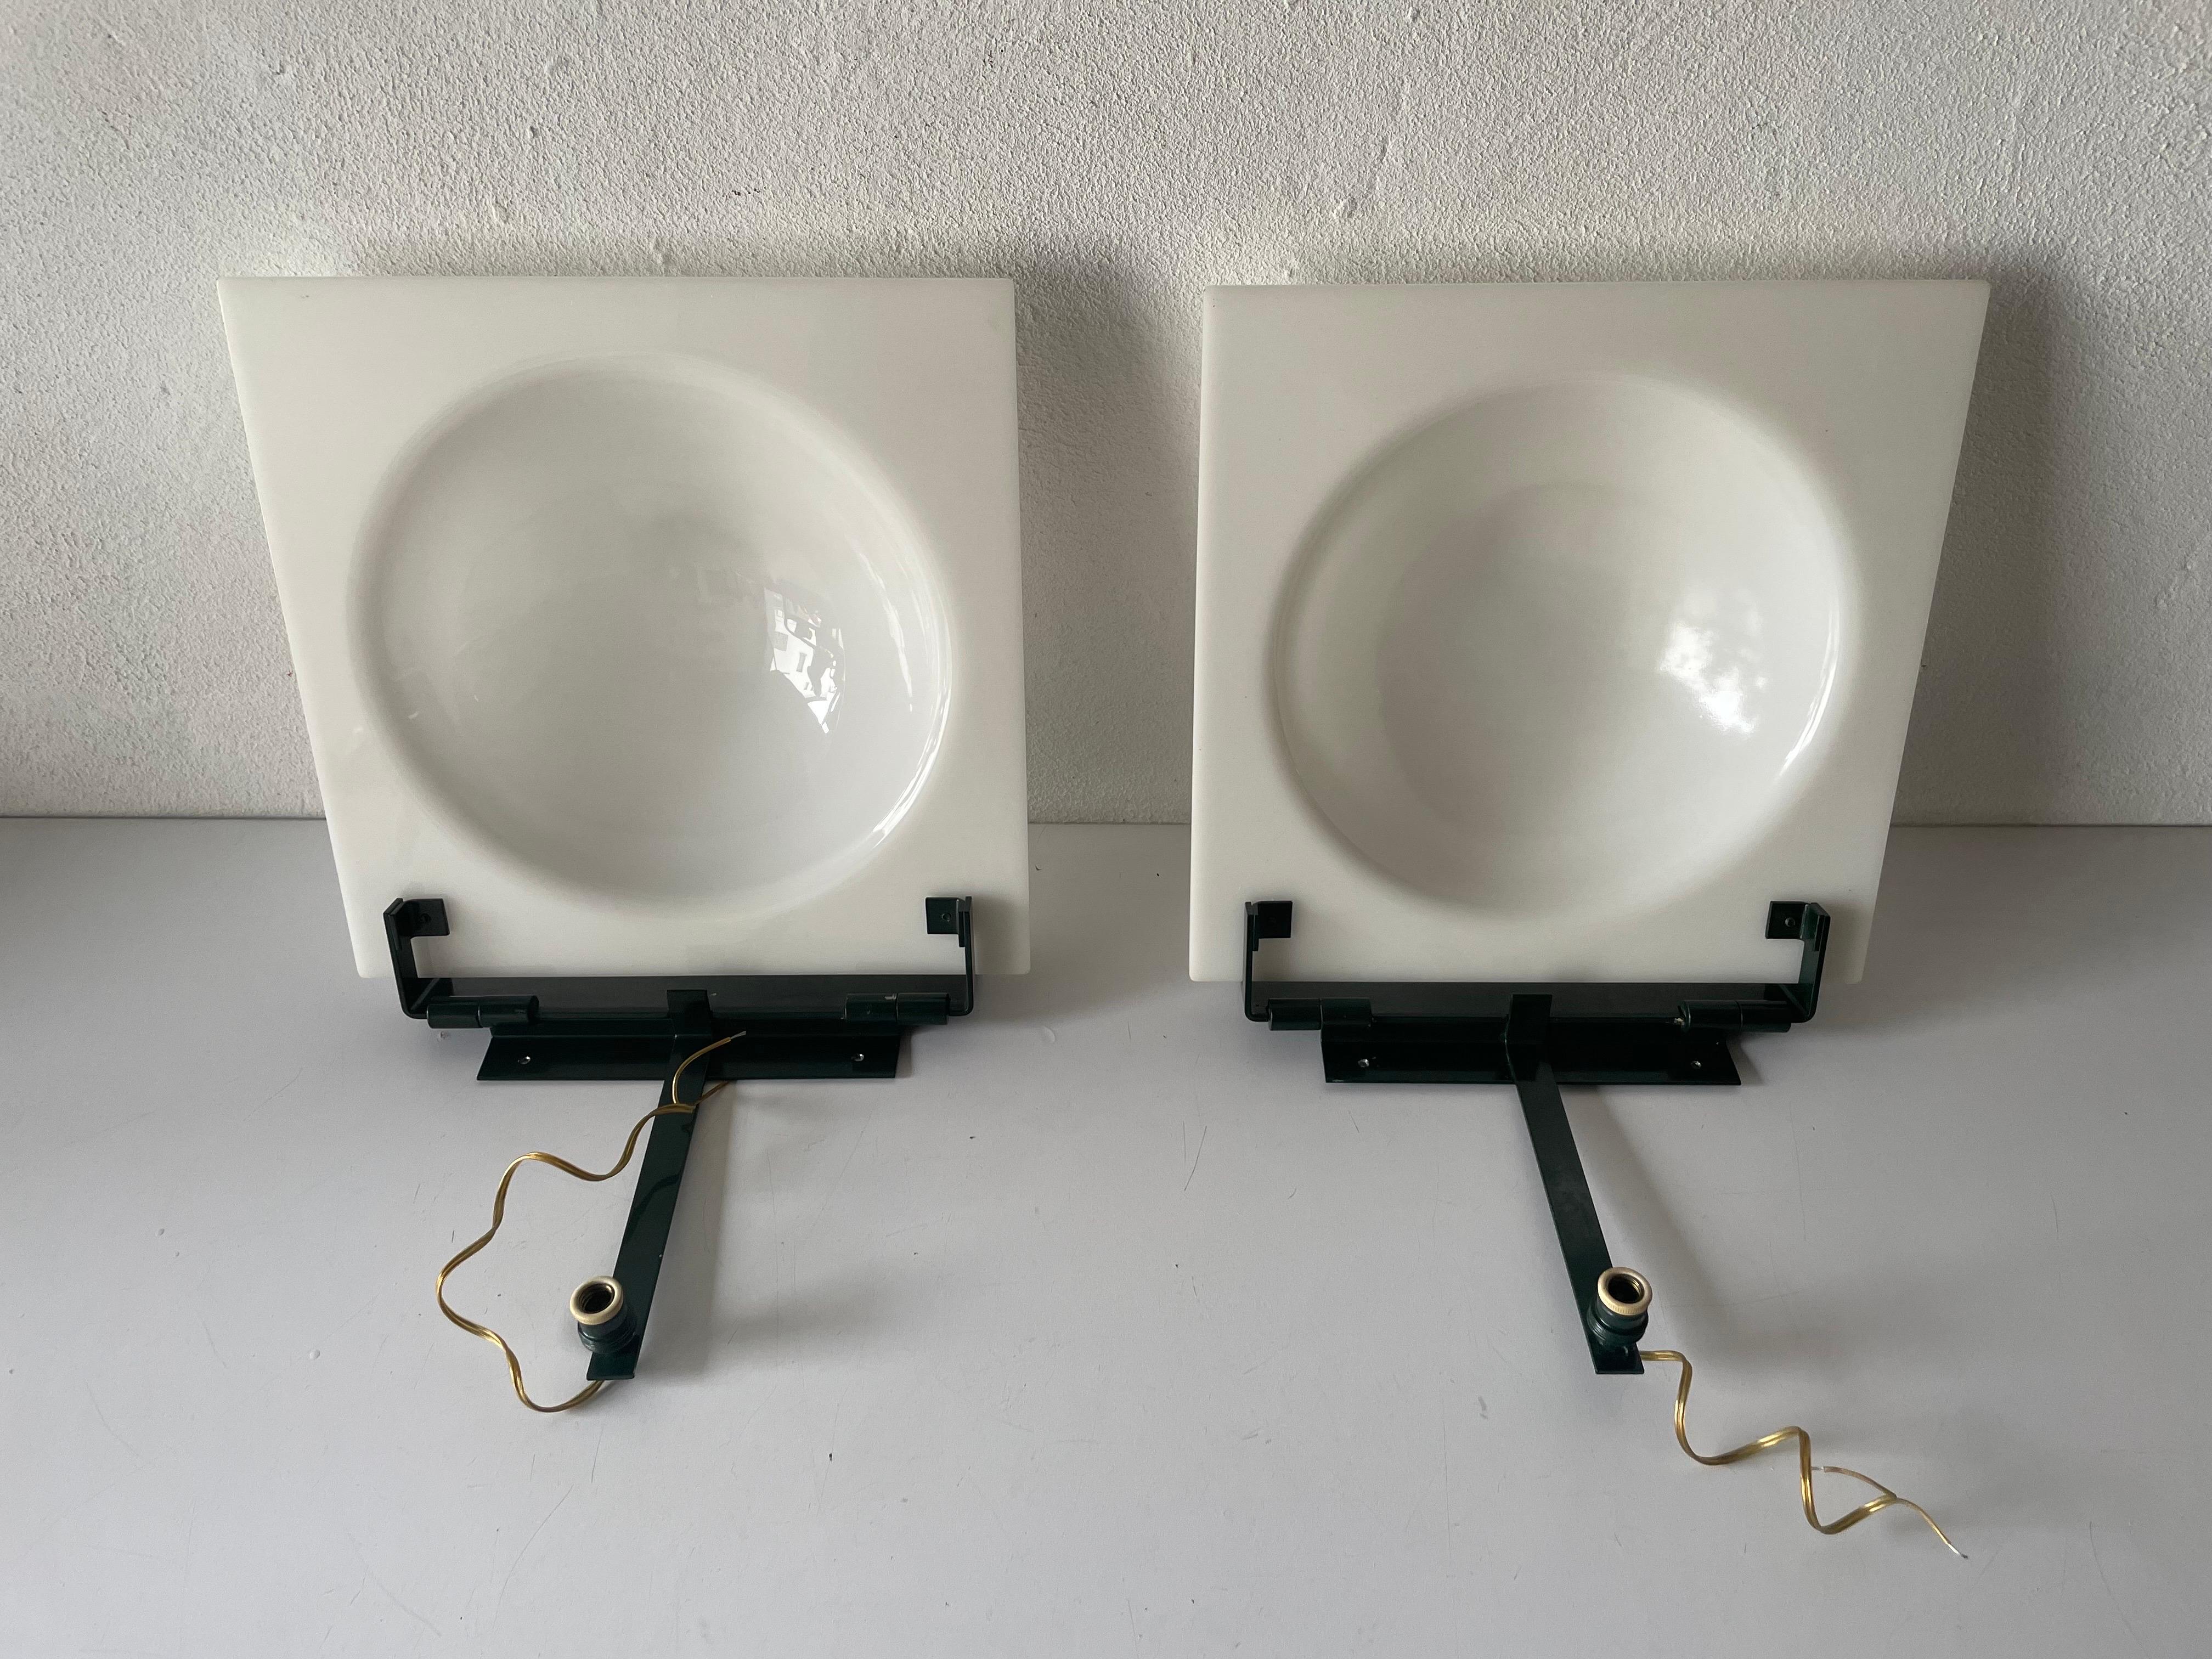 Metal High Quality Plexiglass Bubble Design Pair of Wall Lamps, 1960s, Italy For Sale